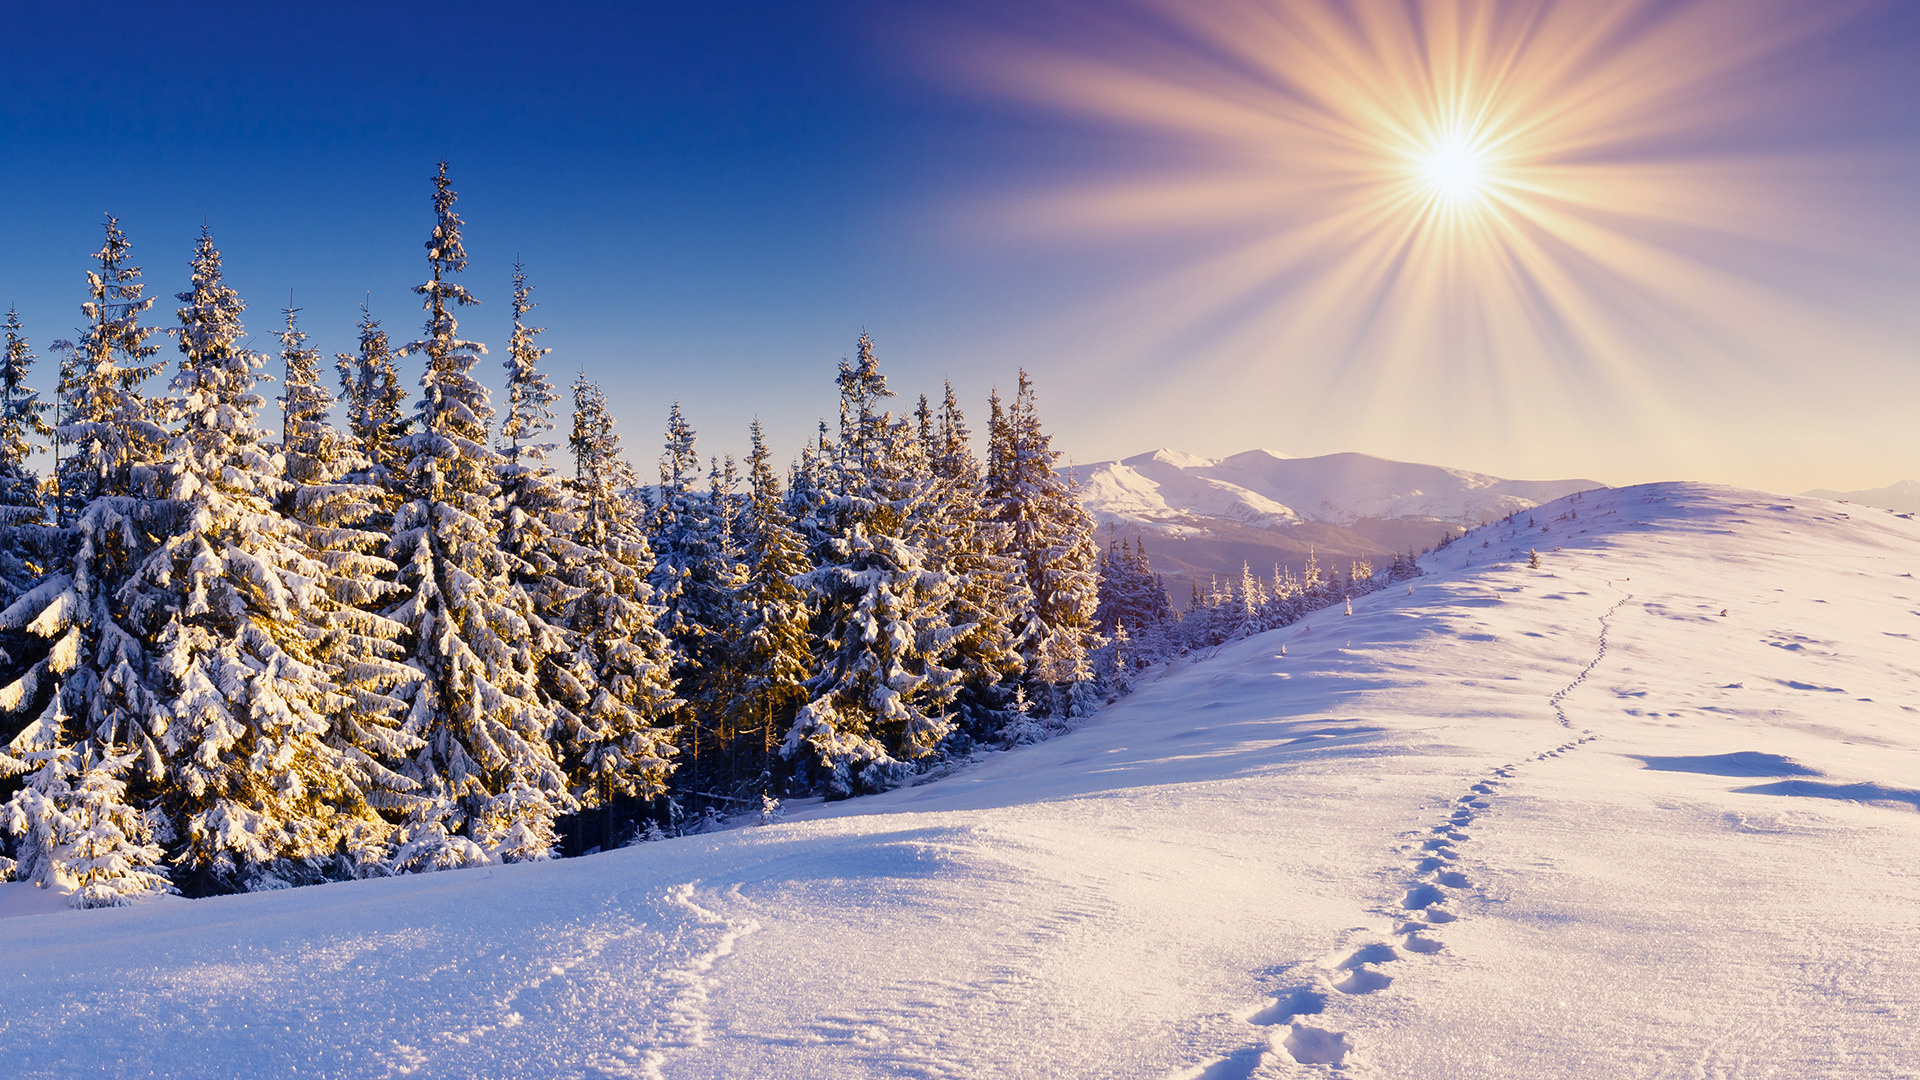 The Sun And Snow Wallpaper Free Wallpapers Hd Desktop - Desktop Wallpaper Winter - HD Wallpaper 